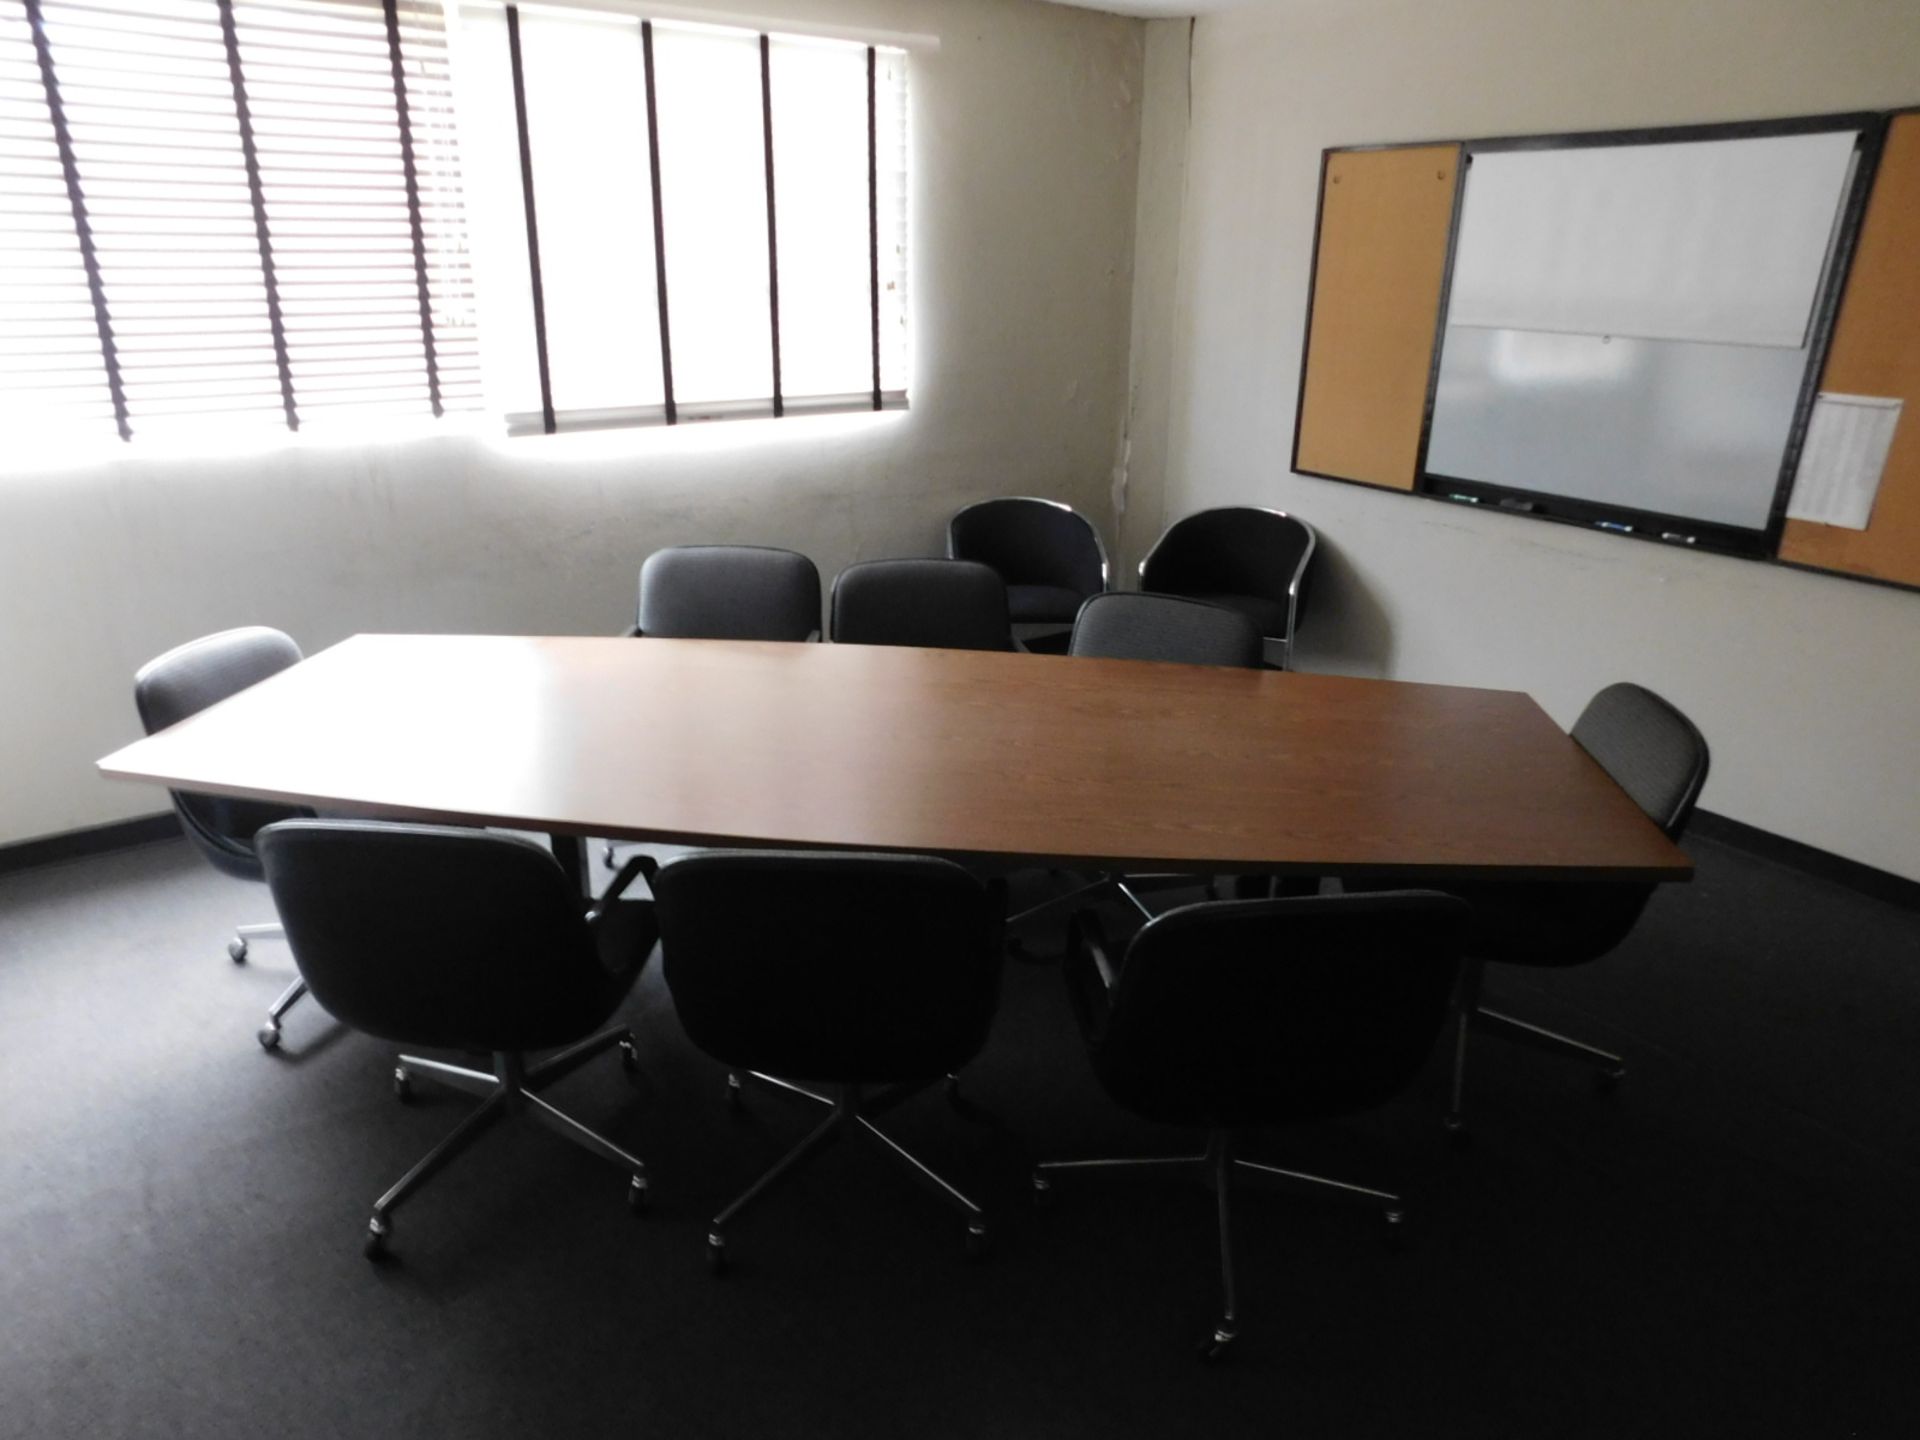 LOT - CONTENTS OF ROOM: 10' CONFERENCE TABLE, CHAIRS, INSIGNIA 55" LED TV MODEL NS-D421NA16 W/